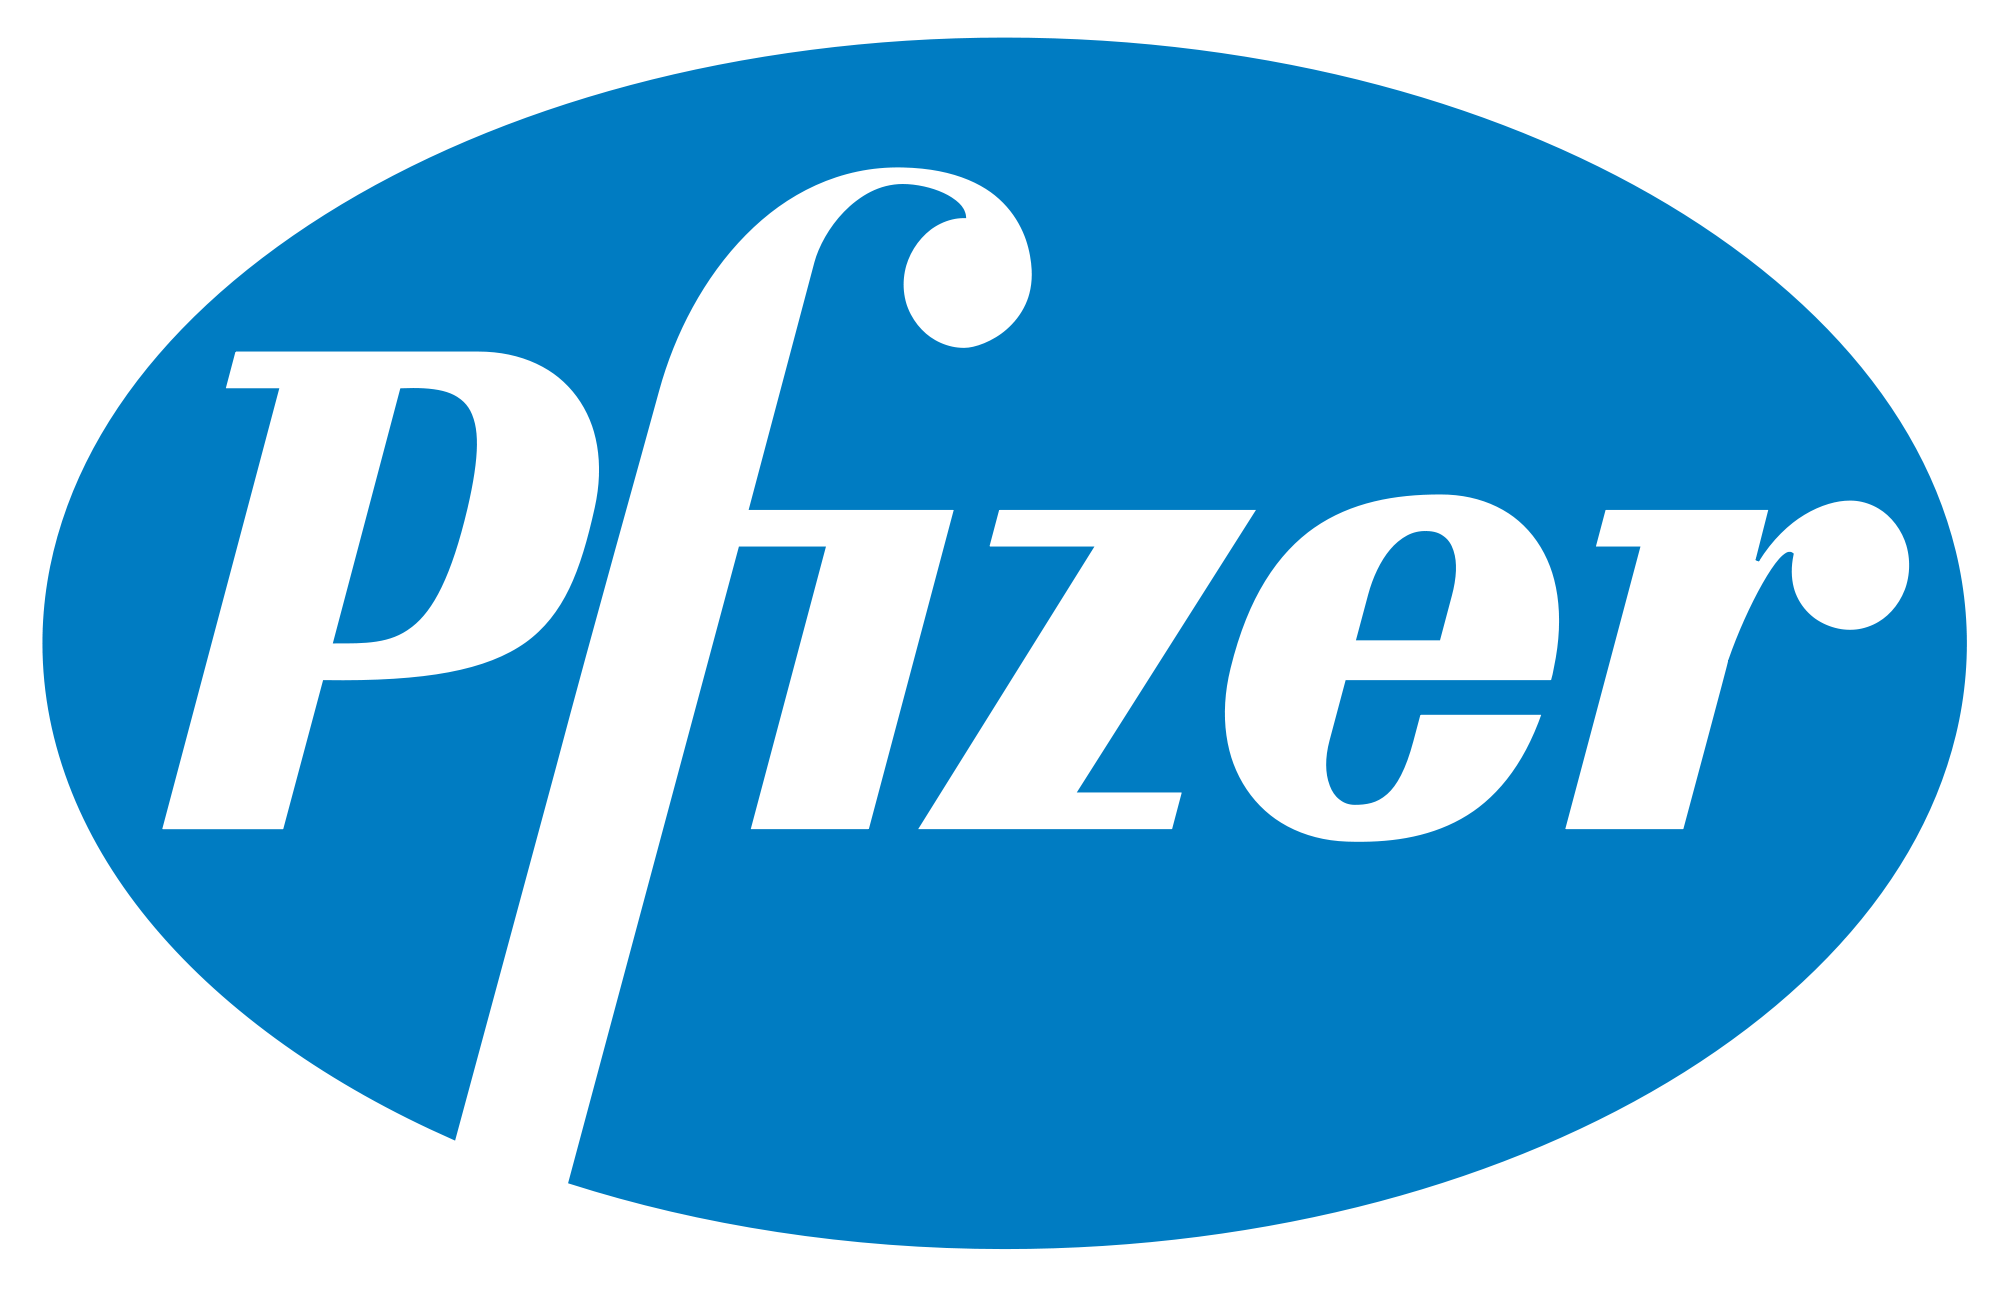 Pfizer appoints Patrick van der Loo as Regional President for Africa, Middle East